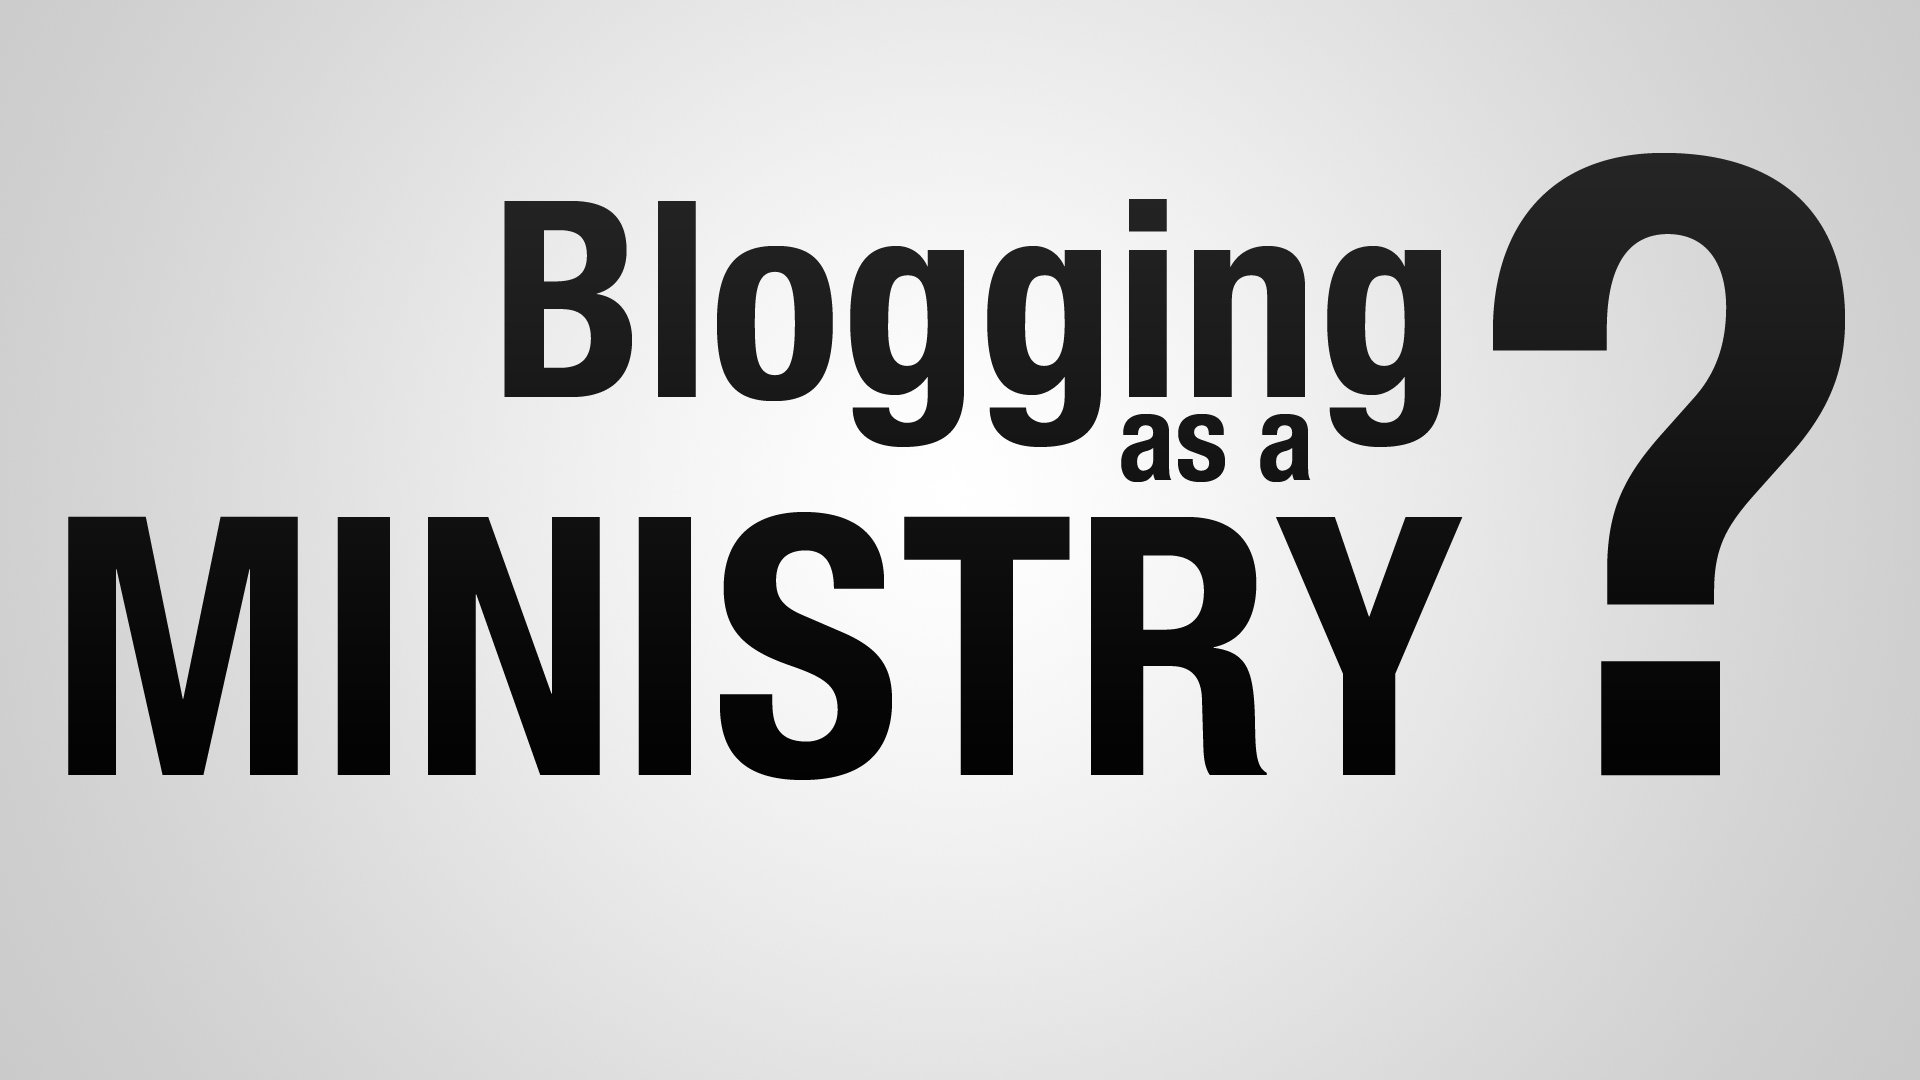 Can Blogging Be a Ministry?